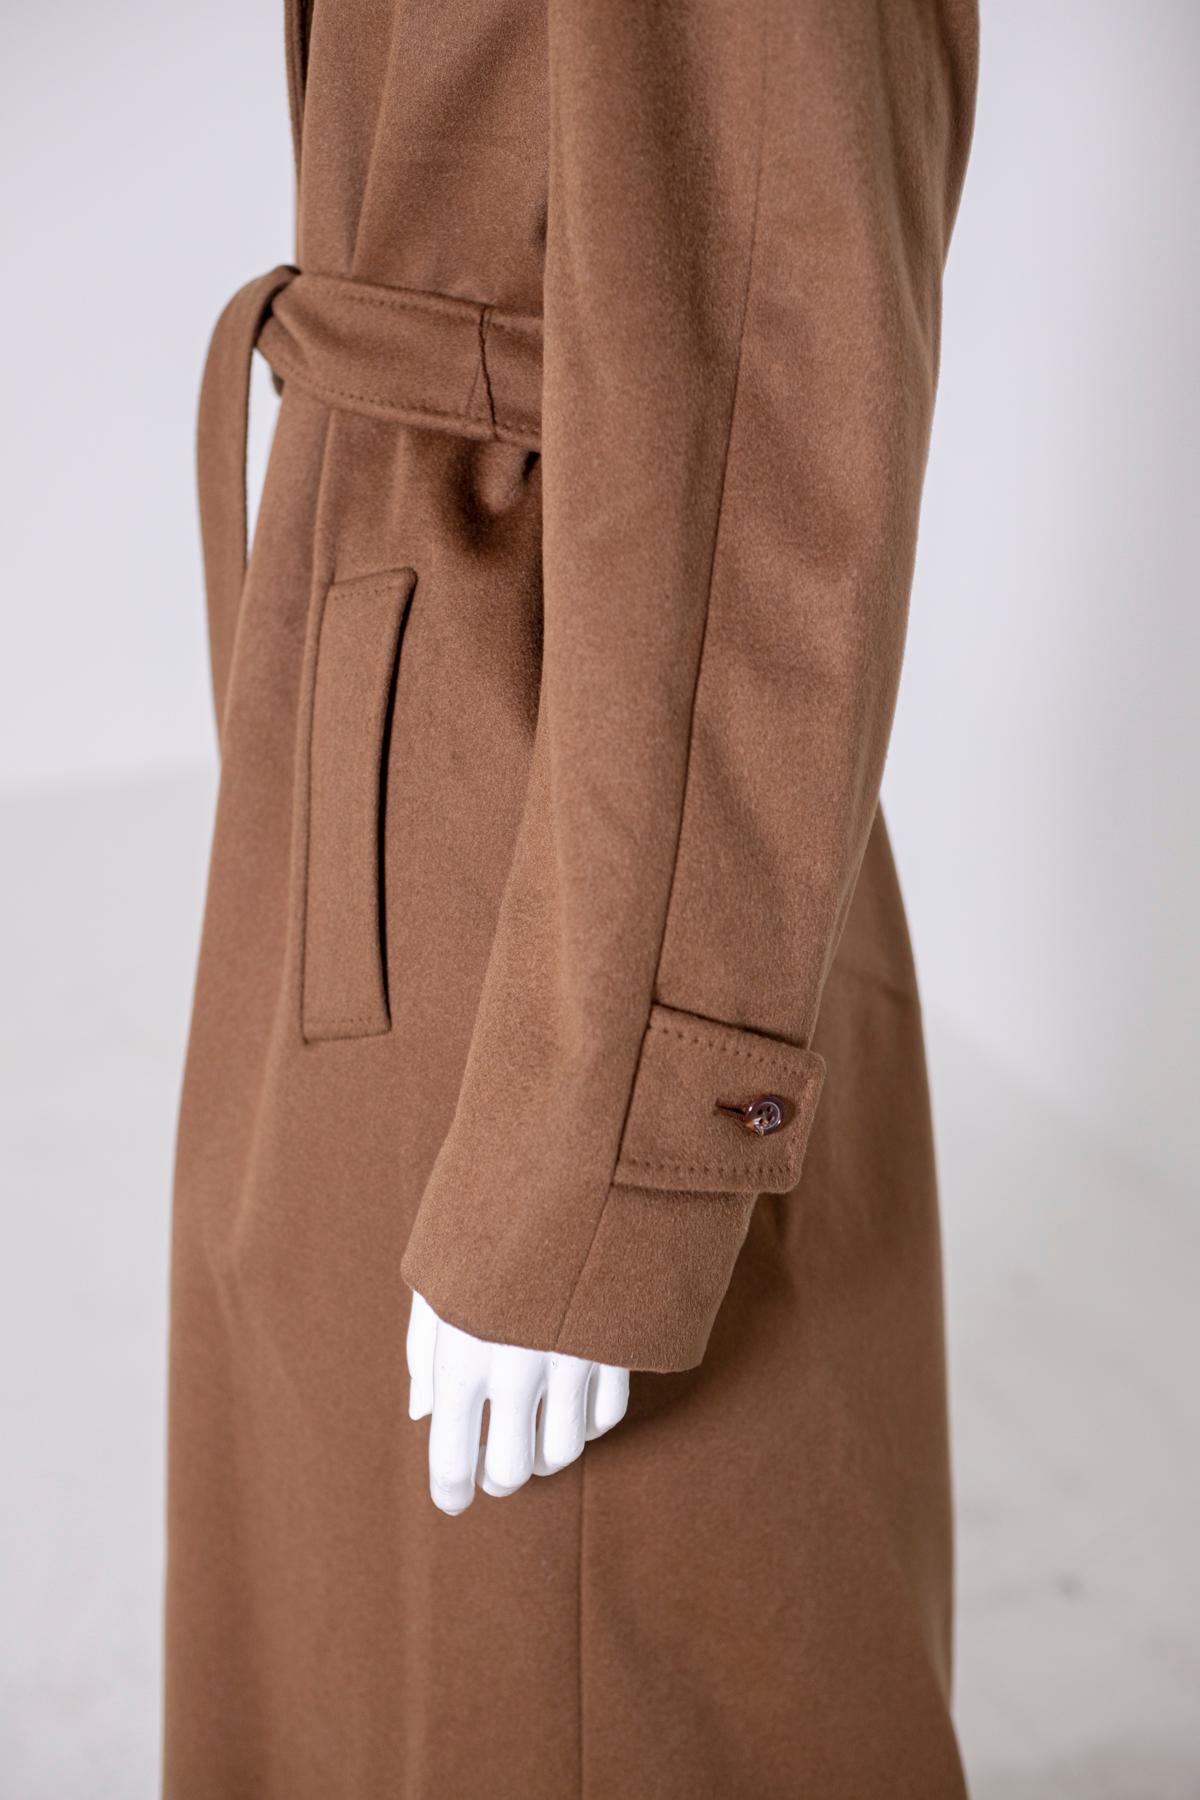 Aquascutum Women's Coat 1990s Brown-Colored In Excellent Condition For Sale In Milano, IT